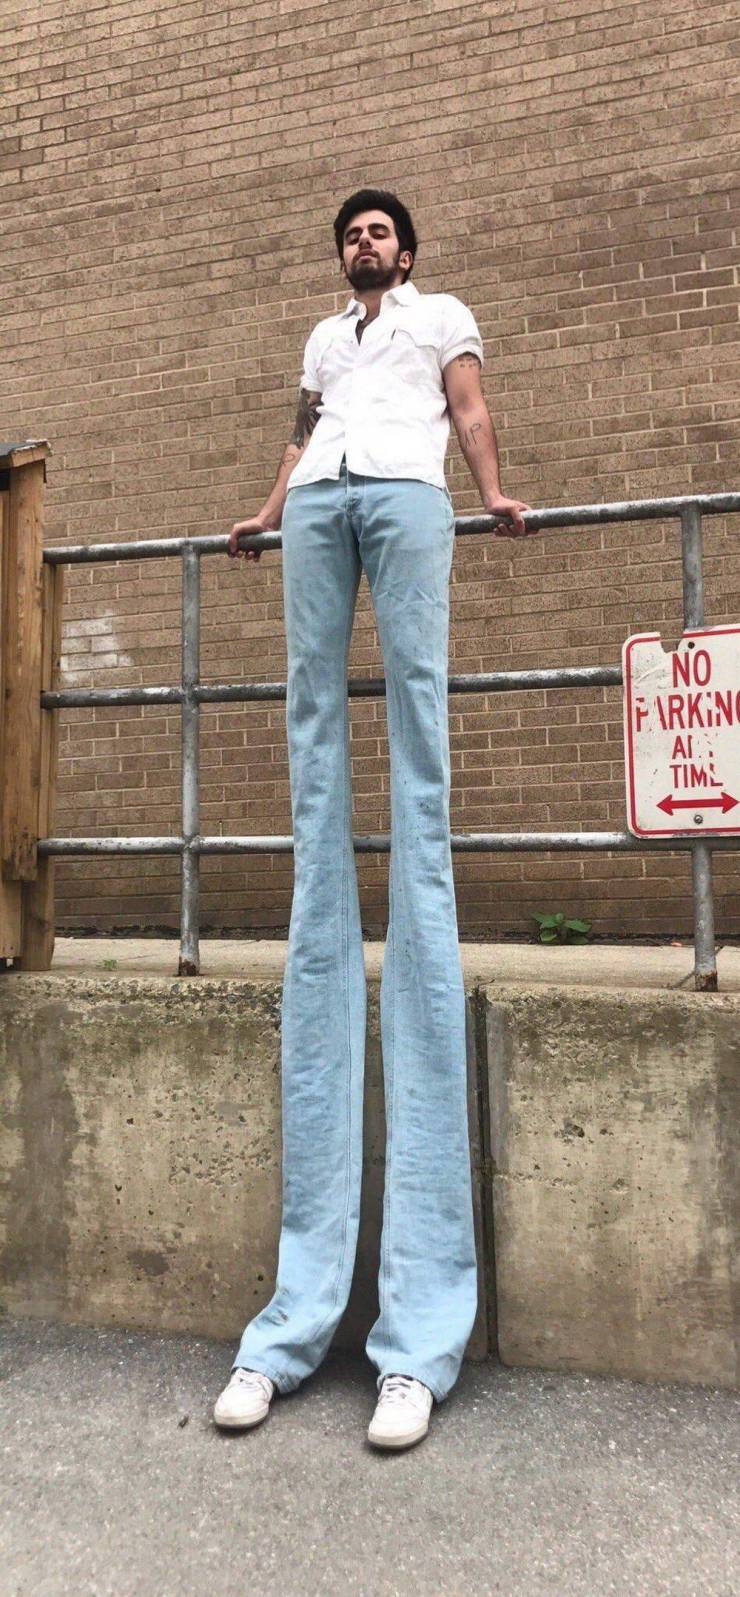 guy with really long jeans